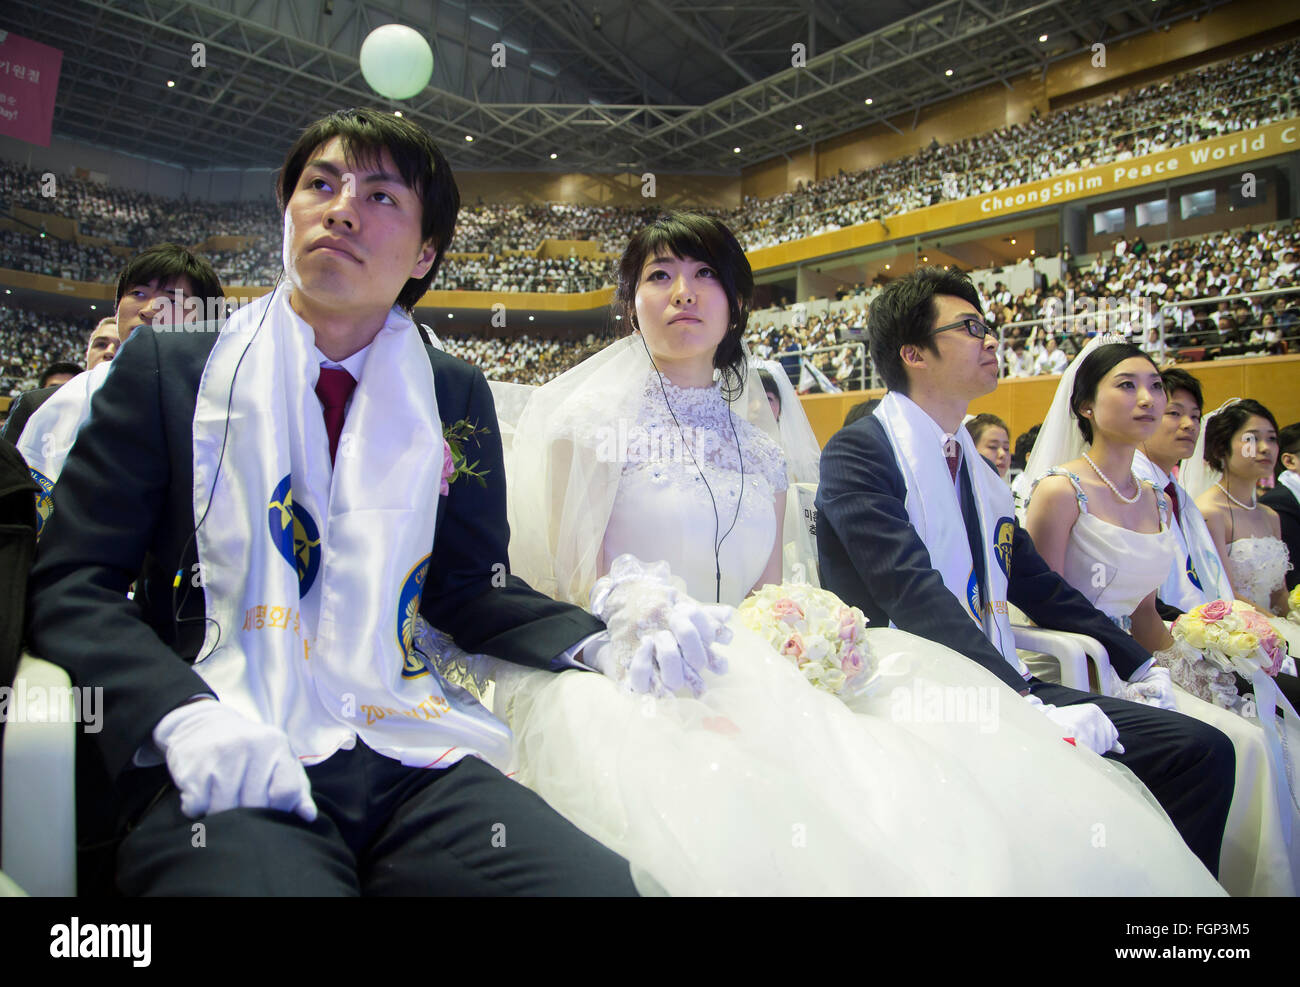 Unification Church's mass wedding, Feb 20, 2016 : Newlyweds participate in a mass wedding ceremony of the Unification Church at the Cheong Shim Peace World Center in Gapyeong, about 60 km (37 miles) east of Seoul, South Korea.The church said about 3,000 couples from more than 60 countries participated in the mass wedding in Gapyeong and other 12,000 couples attended in the wedding ceremony through live-streamed broadcast, which was organized by Han Hak-Ja, widow of the late Rev. Moon Sun-Myung, founder of the Unification Church. © Lee Jae-Won/AFLO/Alamy Live News Stock Photo